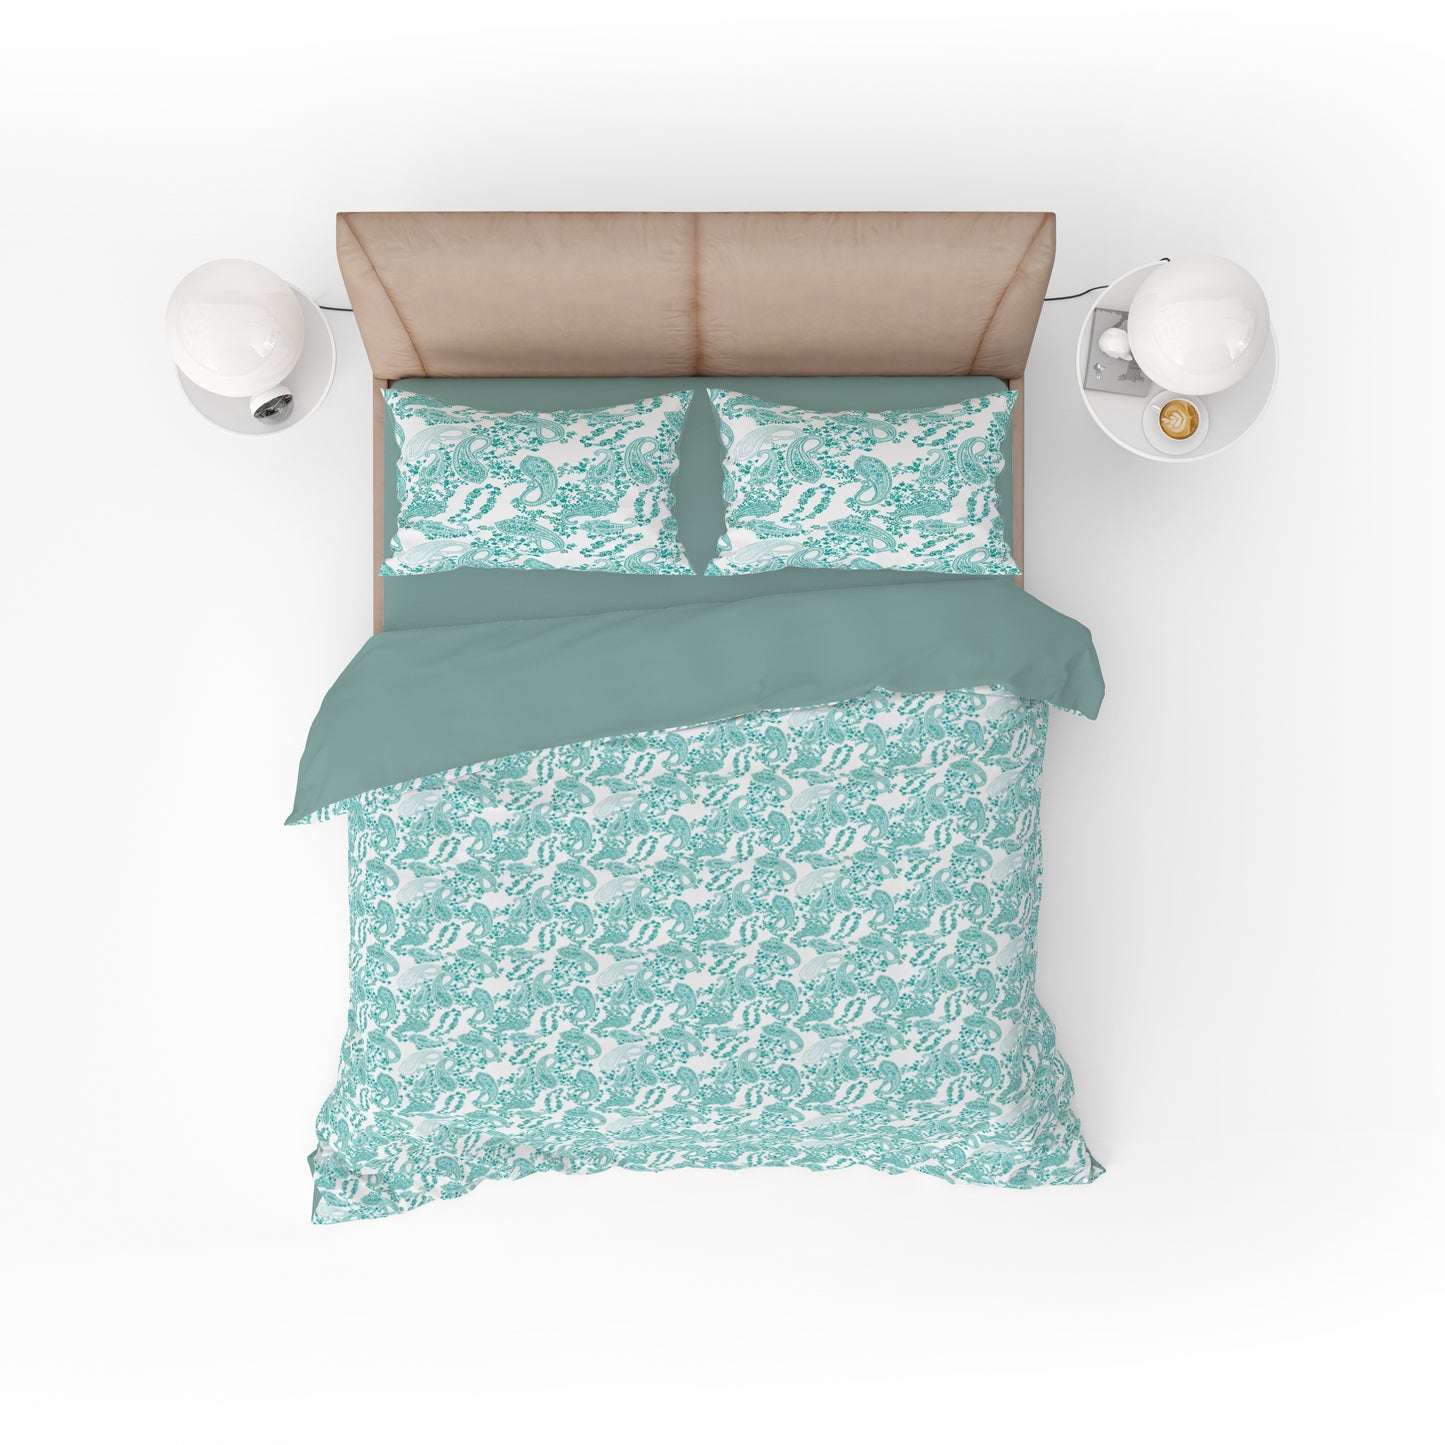 Turquoise Paisley - Elegance Meets Drama for a Chic Bedroom Upgrade King Size